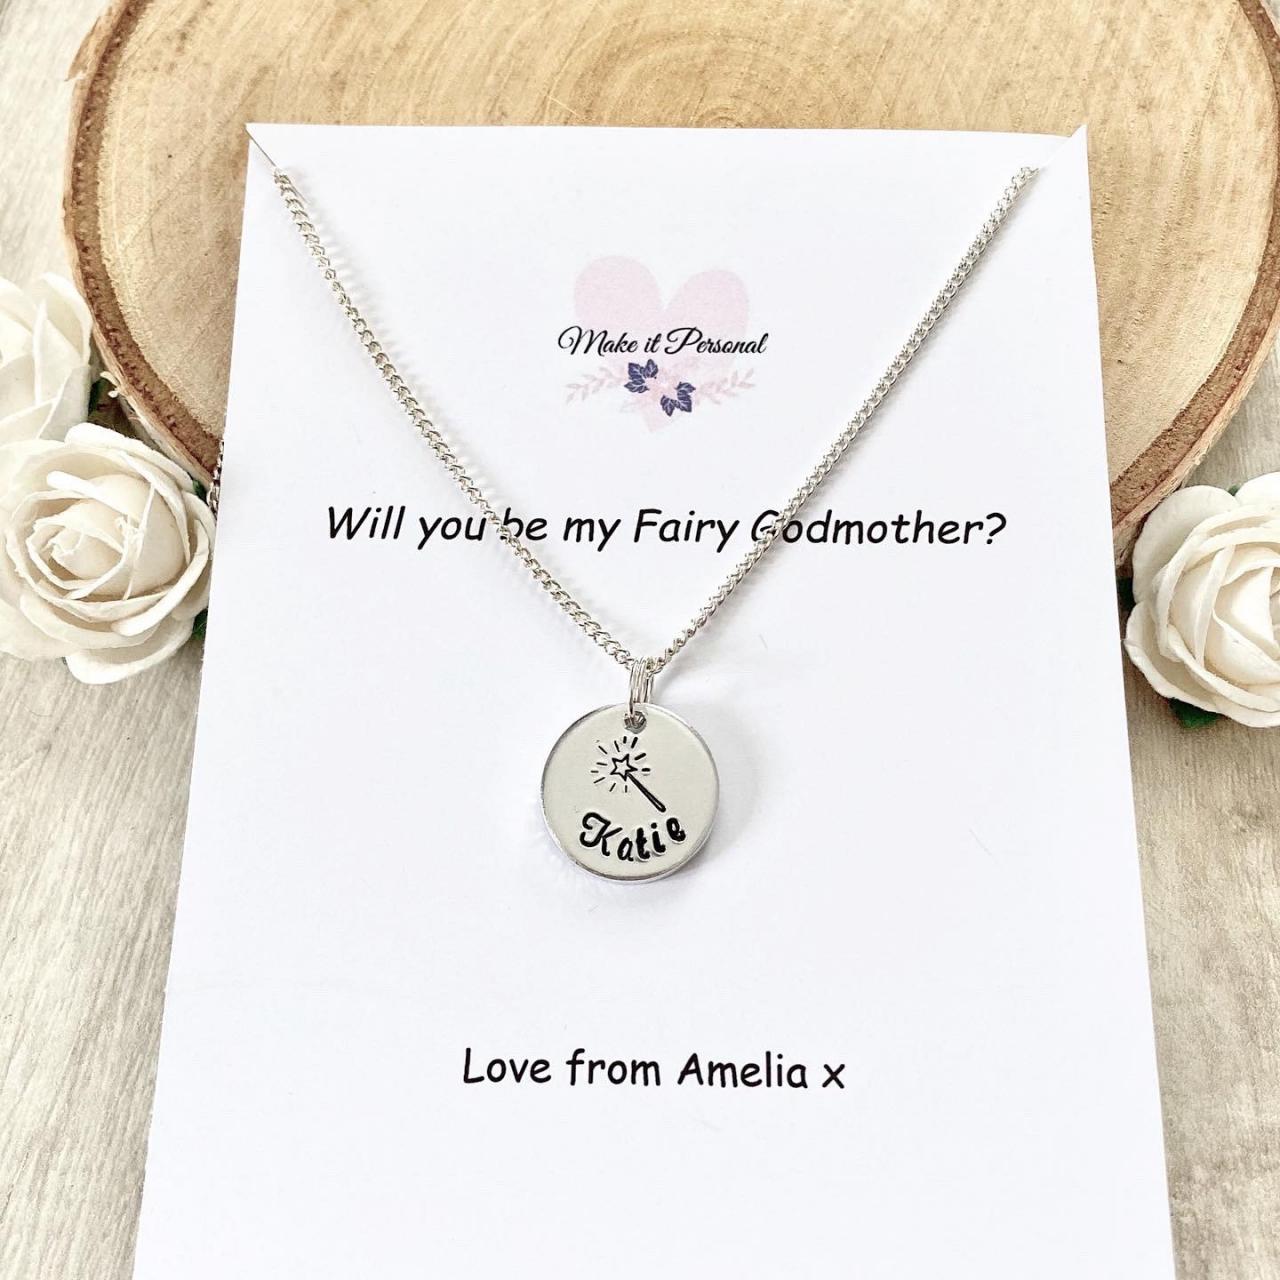 Godmother Gift, Gift For Godmother, Fairy Godmother, Christening, Godparent Gift, Guardian, Gift For Godparent, Personalised Necklace